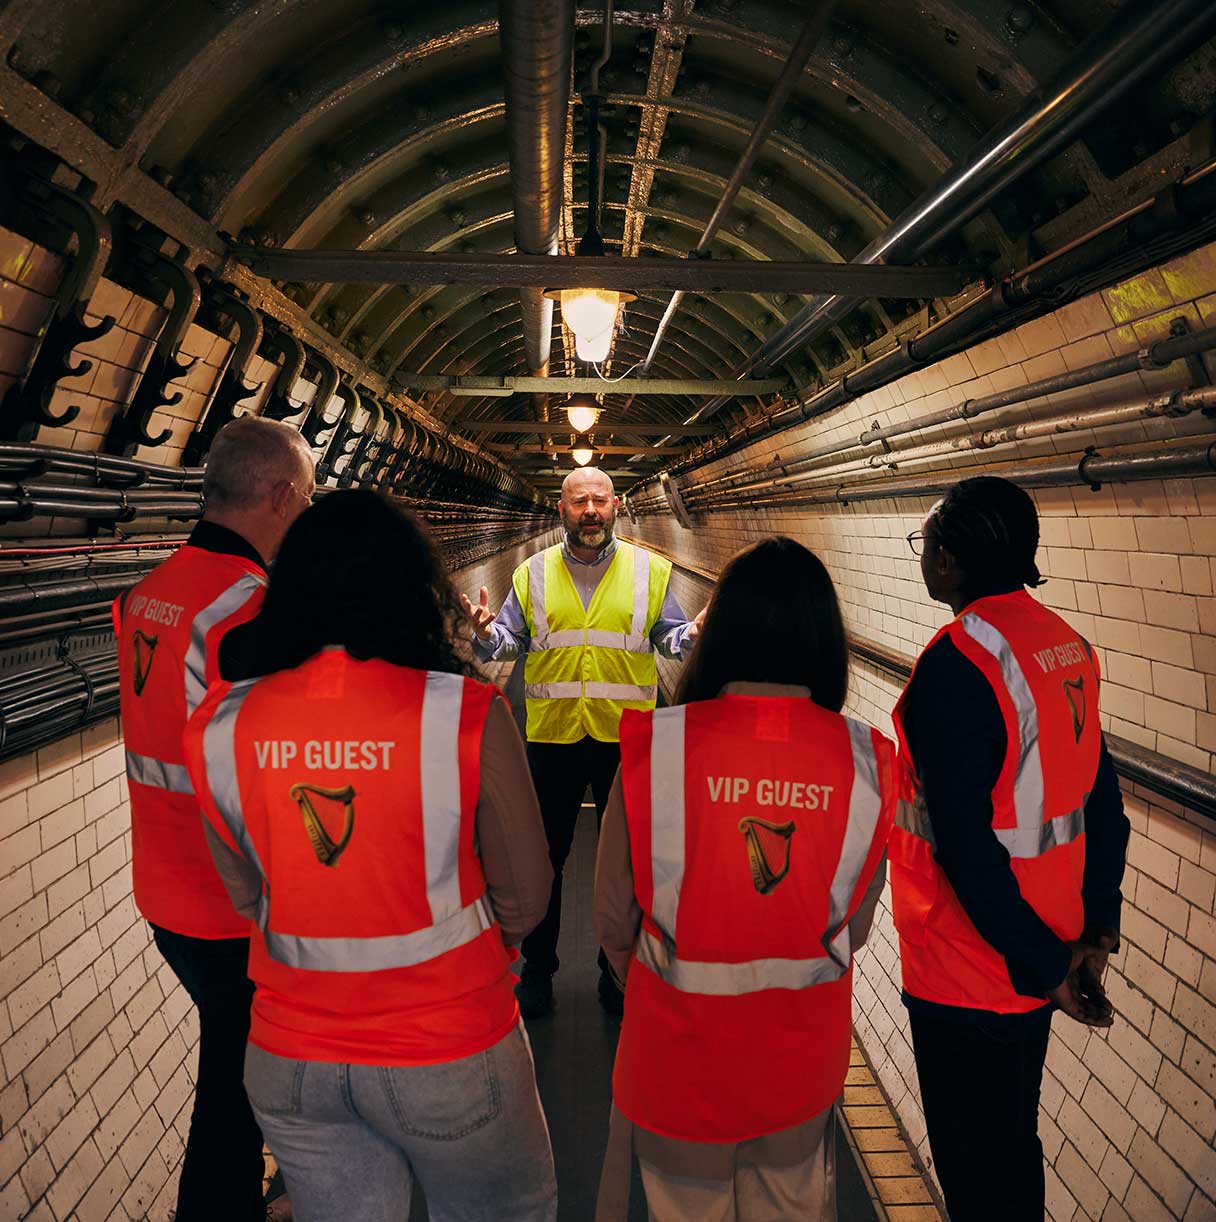 A Guinness tour guide stands in an underground tunnel with four VIP guests, all wearing high vis